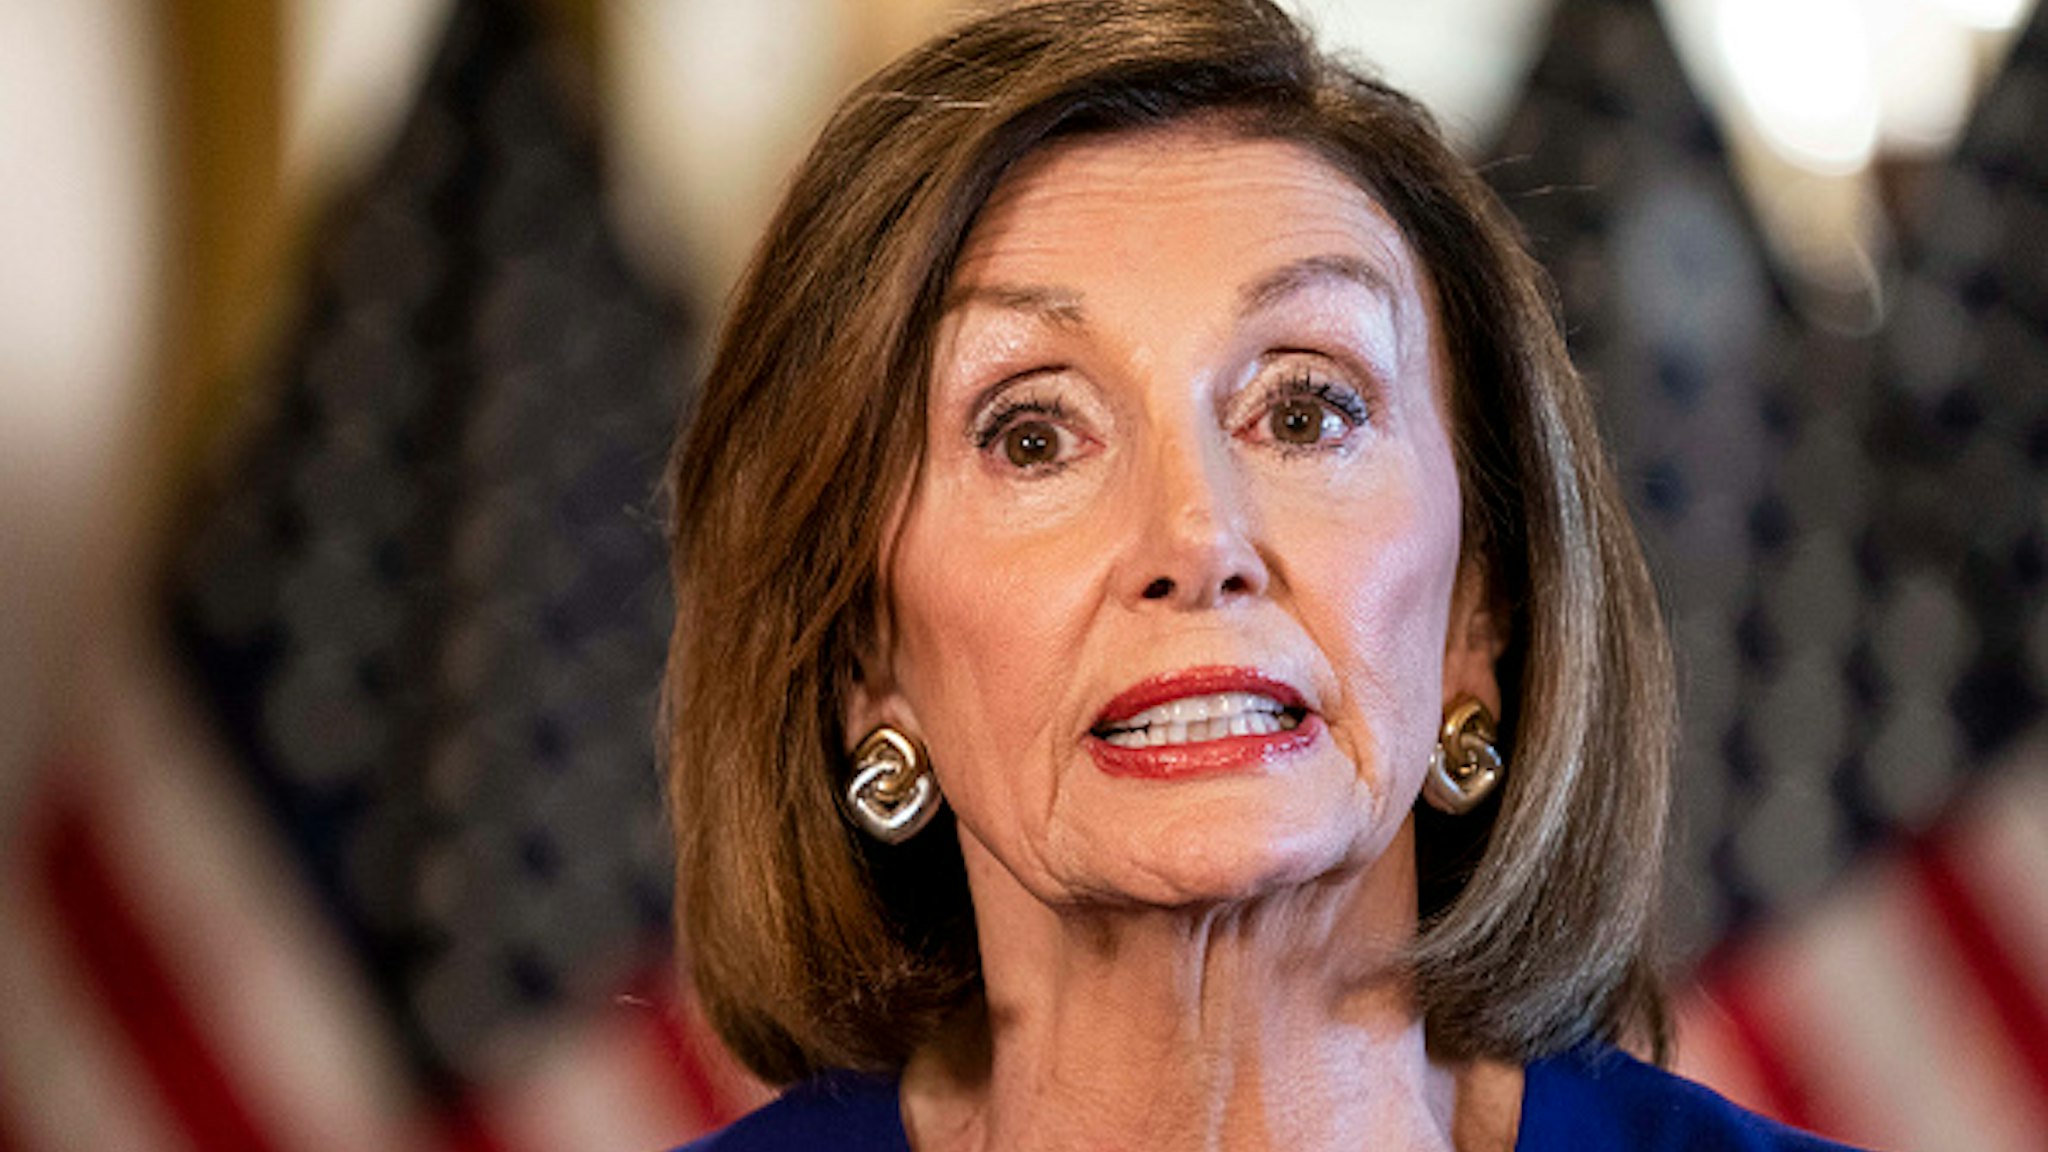 WASHINGTON, DC - September 24: From the Speaker's Balcony hallway, Speaker of the House Nancy Pelosi delivers a speech concerning a formal impeachment inquiry into President Donald Trump on Capitol Hill in Washington, DC on Tuesday September 24, 2019.